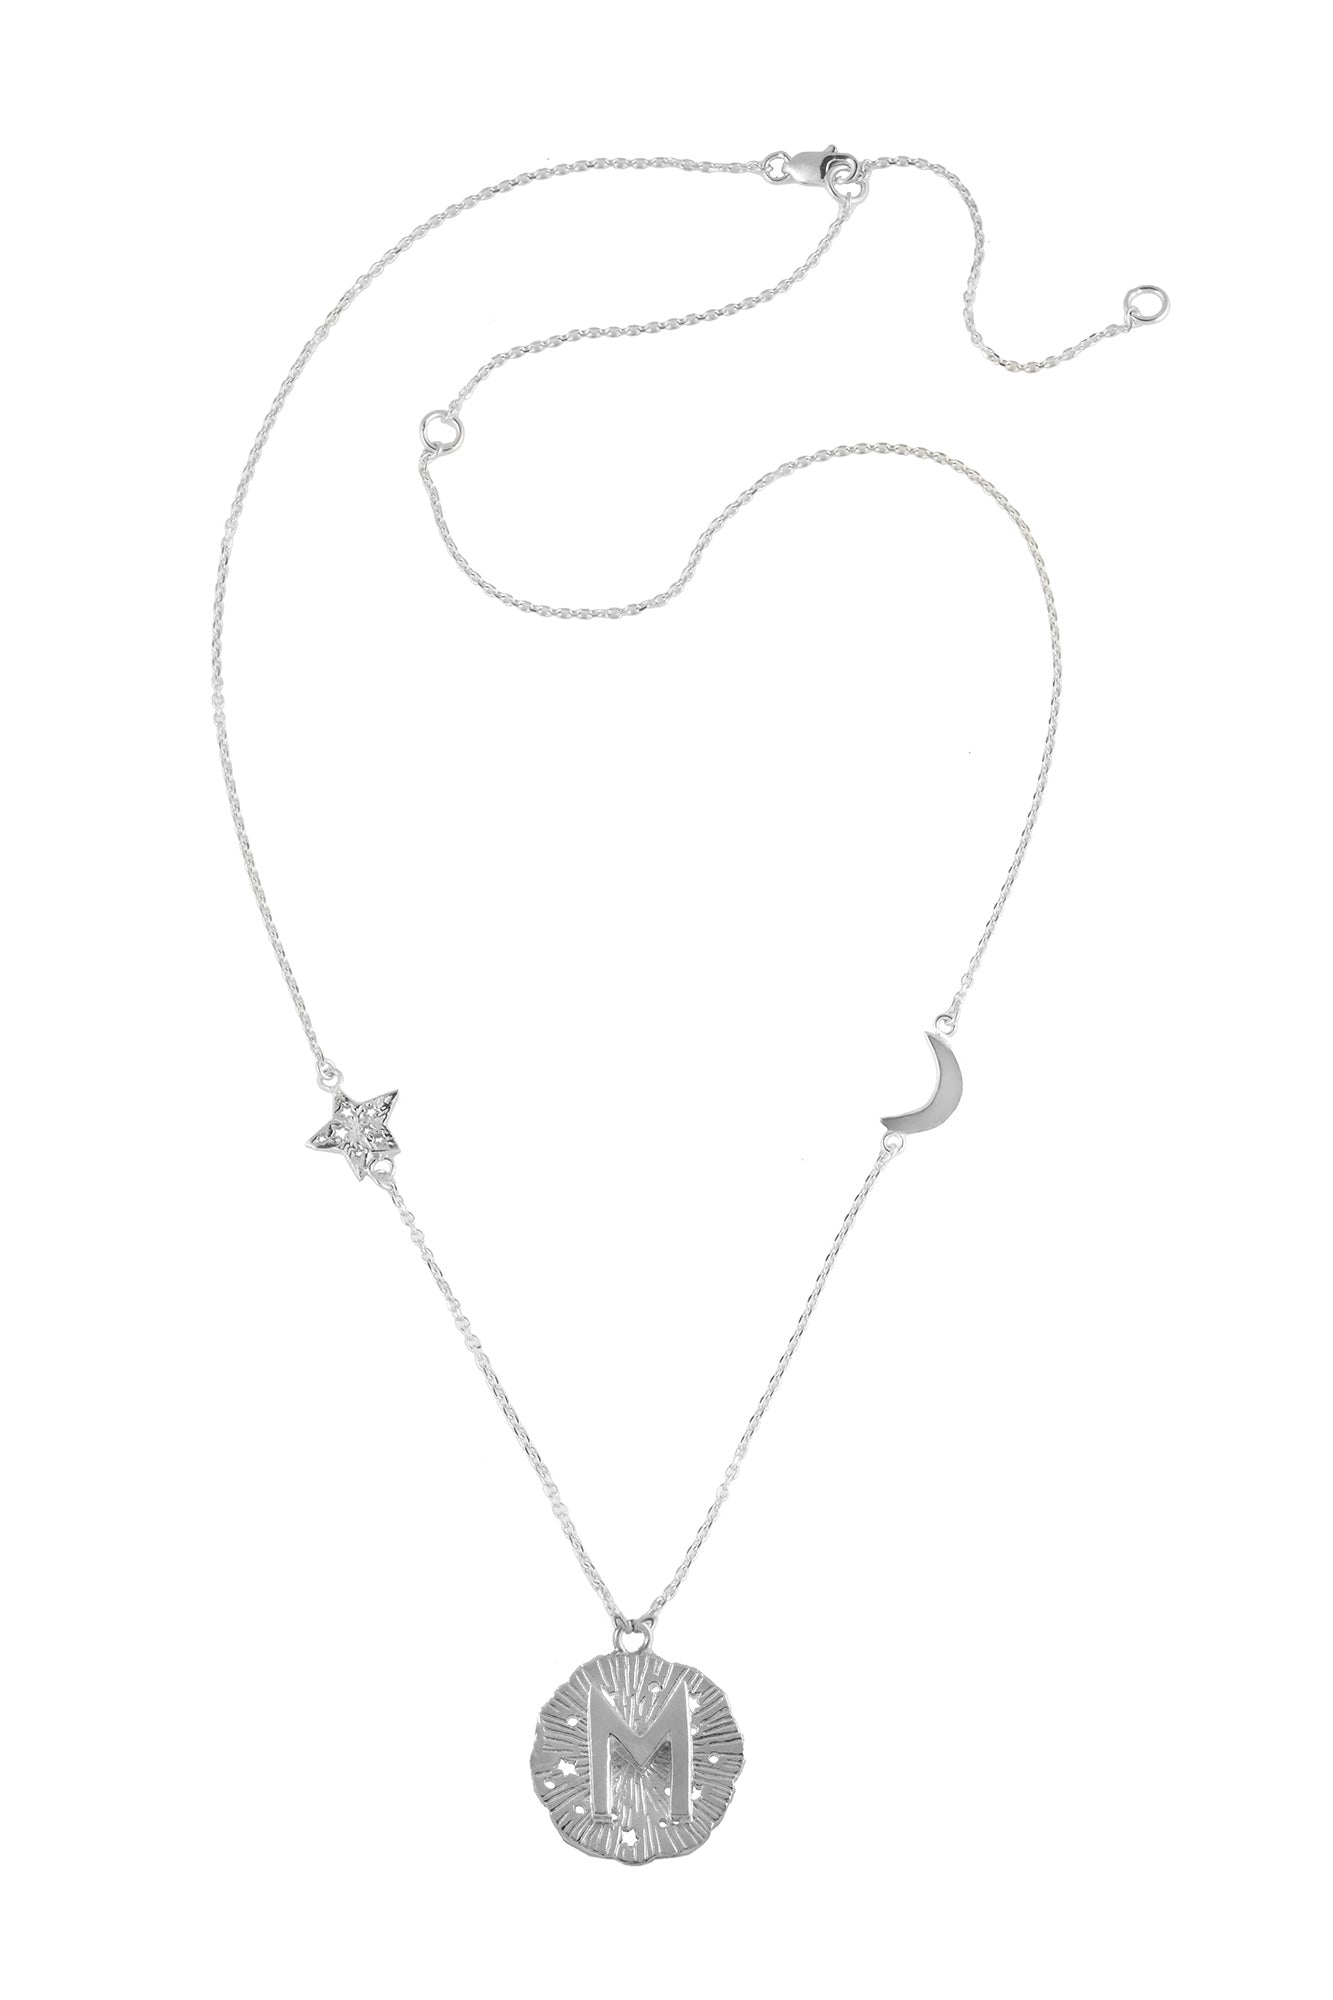 Chain necklace with small runic pendant Ewaz, star and moon, 46 сm. Silver